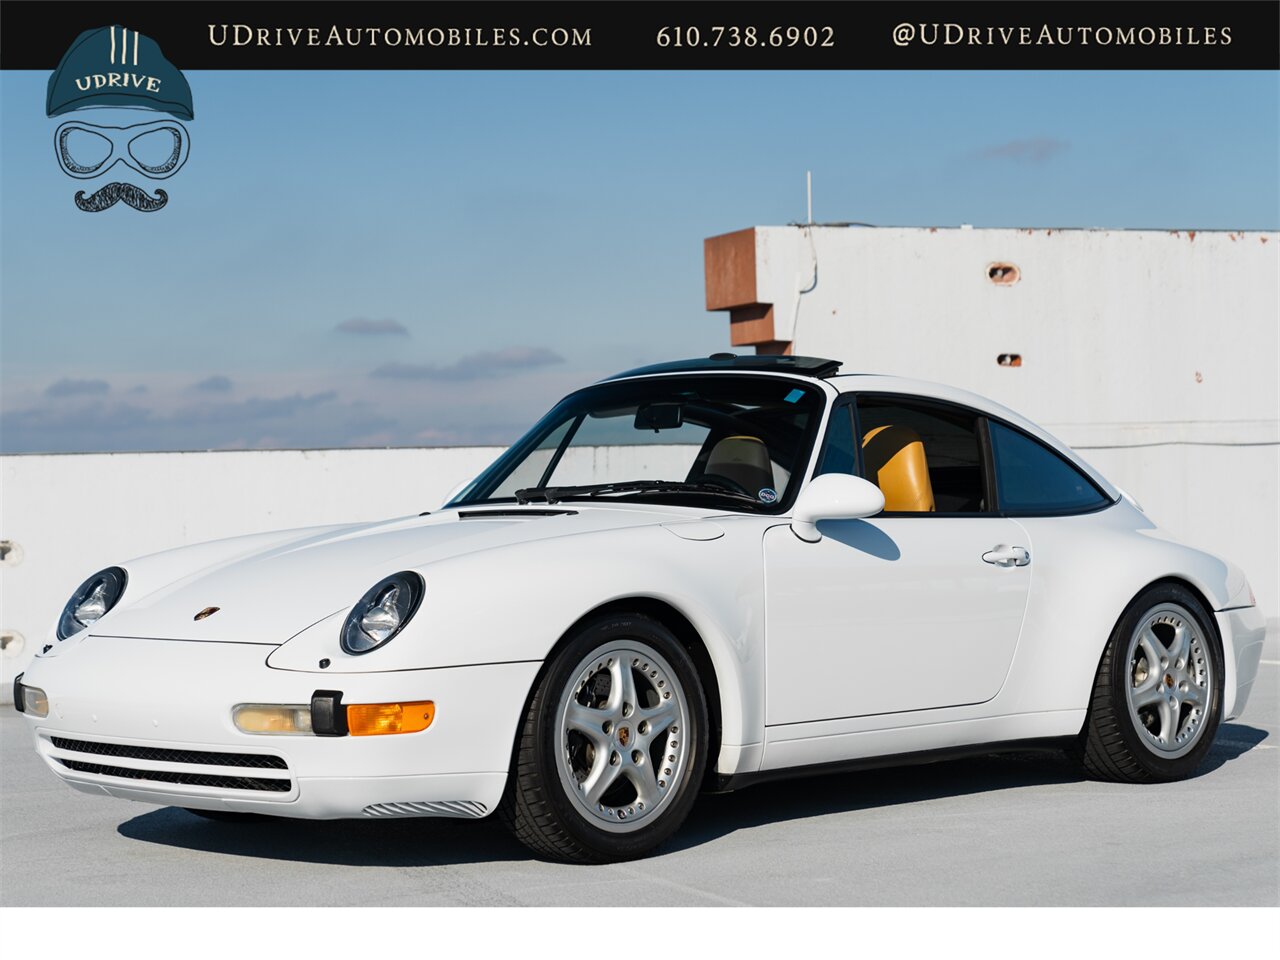 1998 Porsche 911 Carrera 993 Targa  1 of 122 Produced 6 Speed $10k Recent Service Engine Reseal - Photo 11 - West Chester, PA 19382